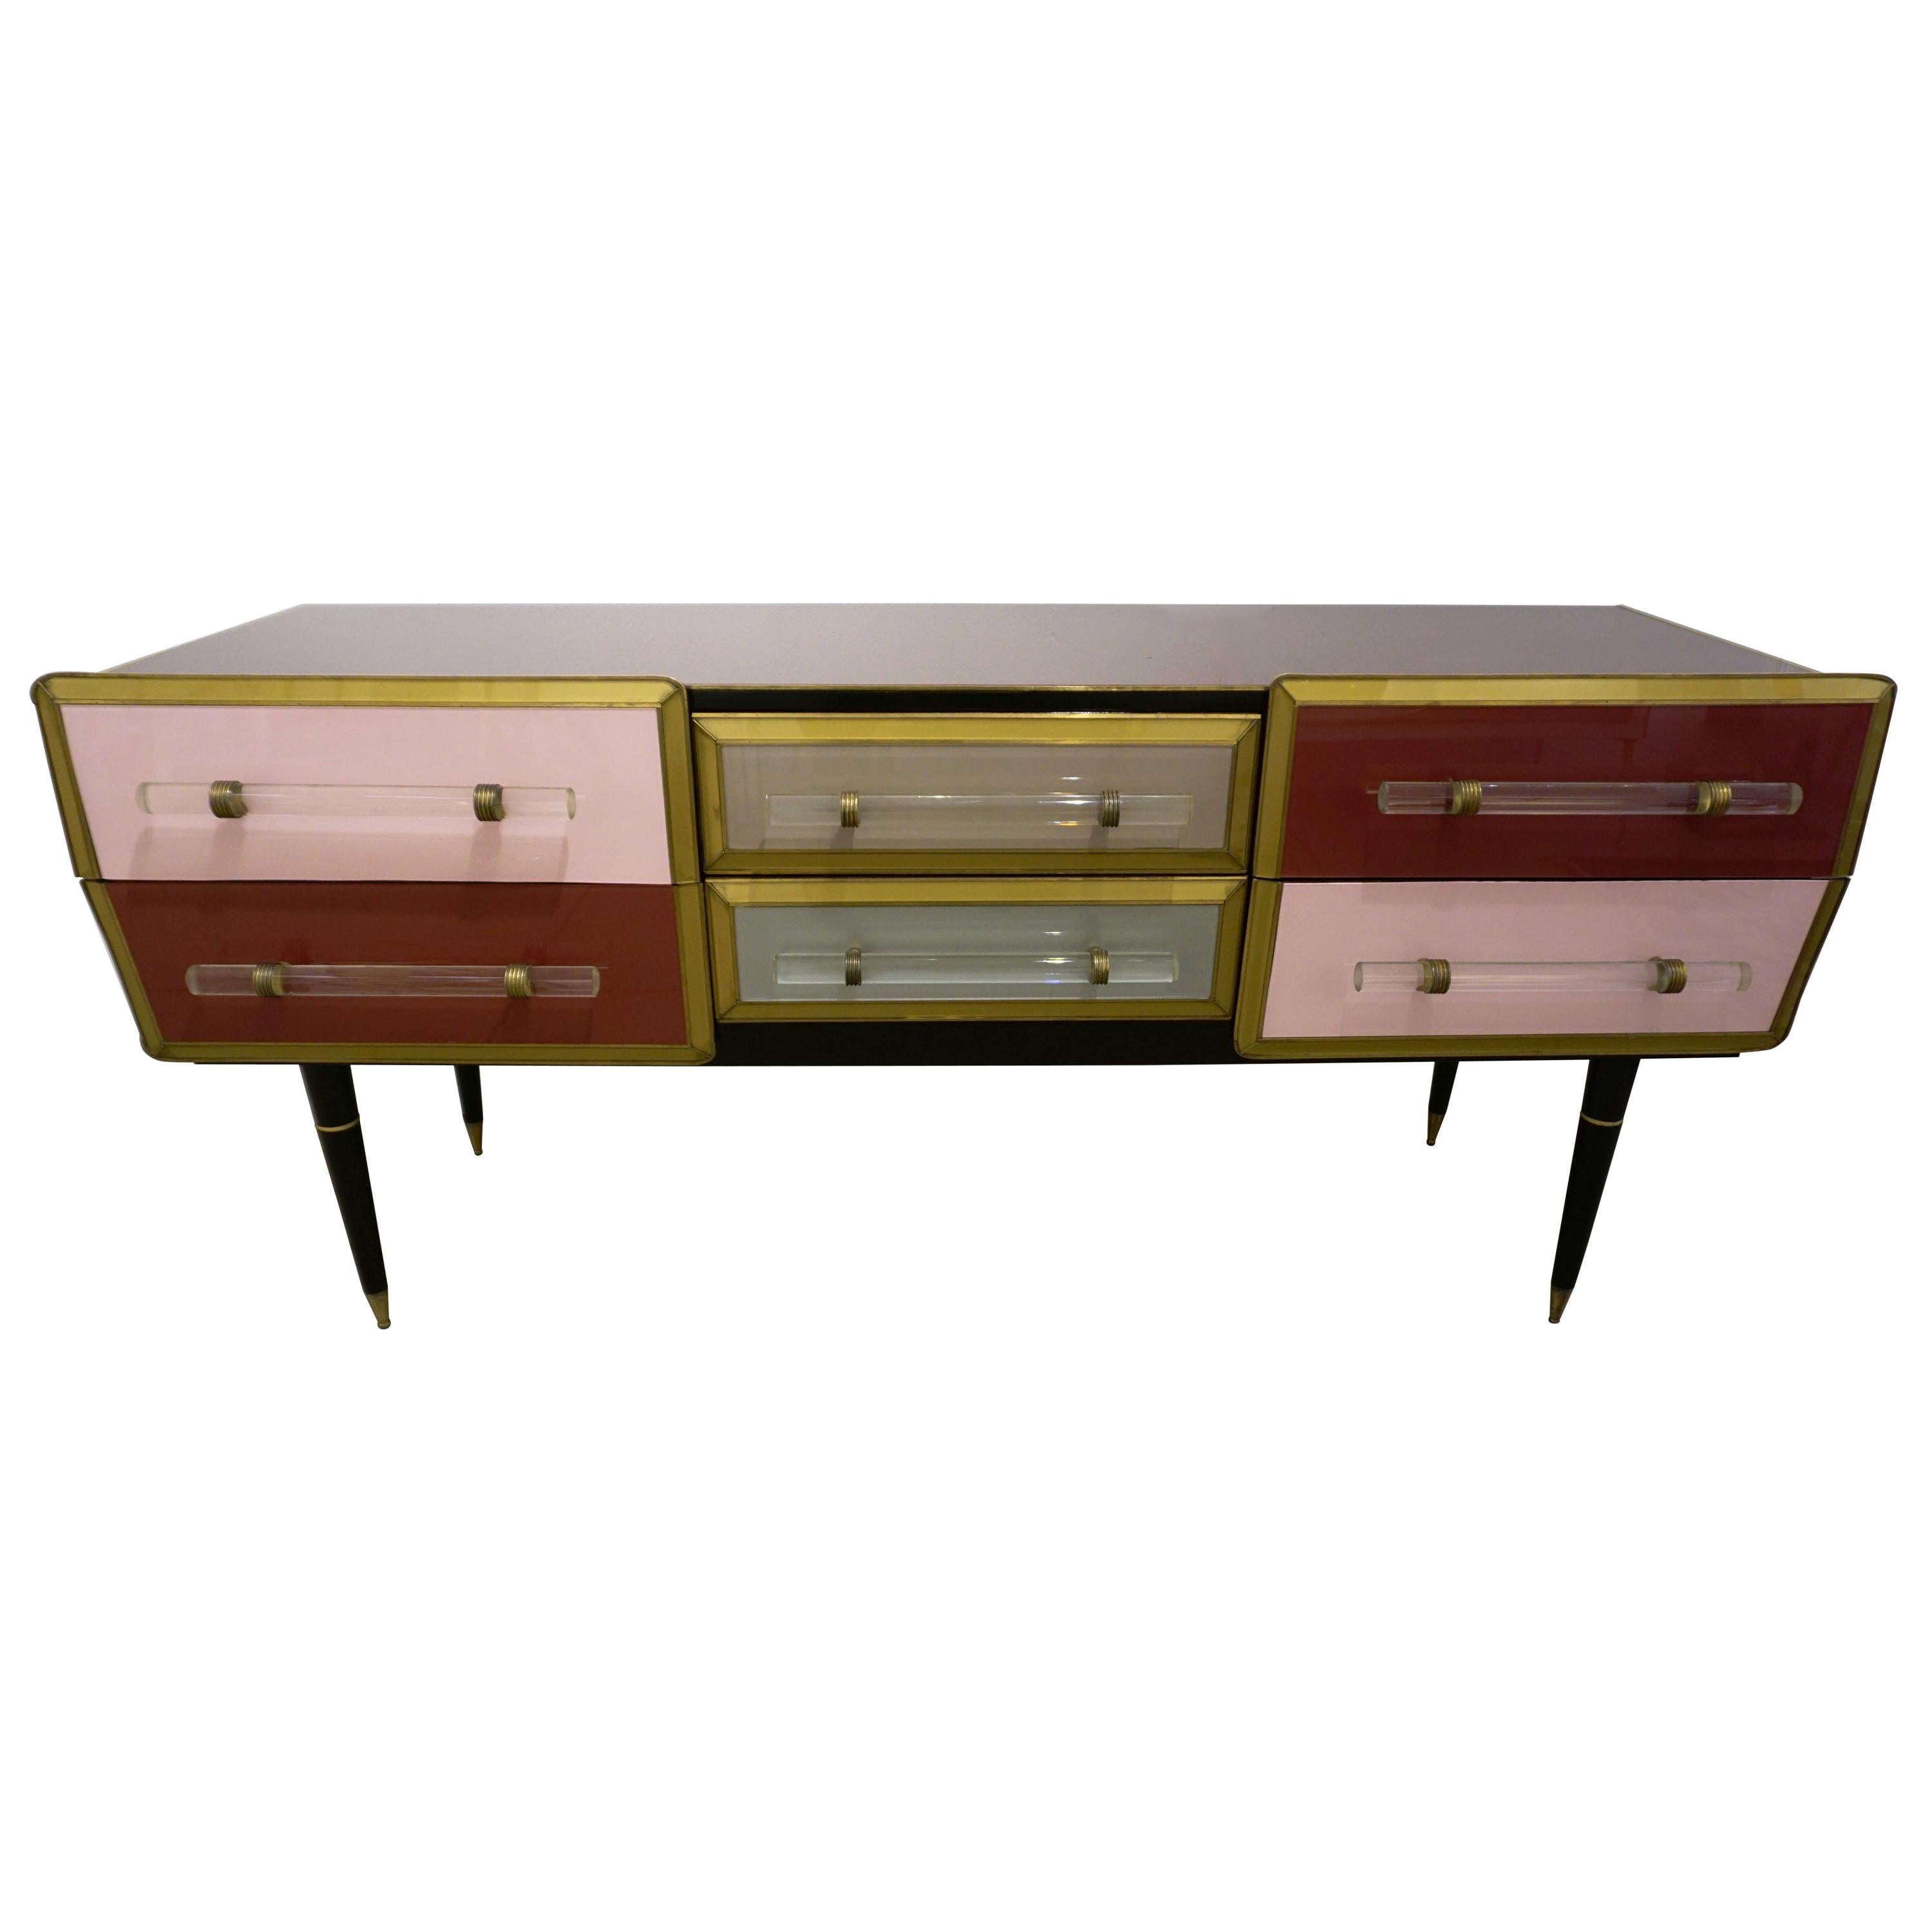 1960s Italian Mid-Century Modern Rose Pink Gray Wine Gold Sideboard / Console